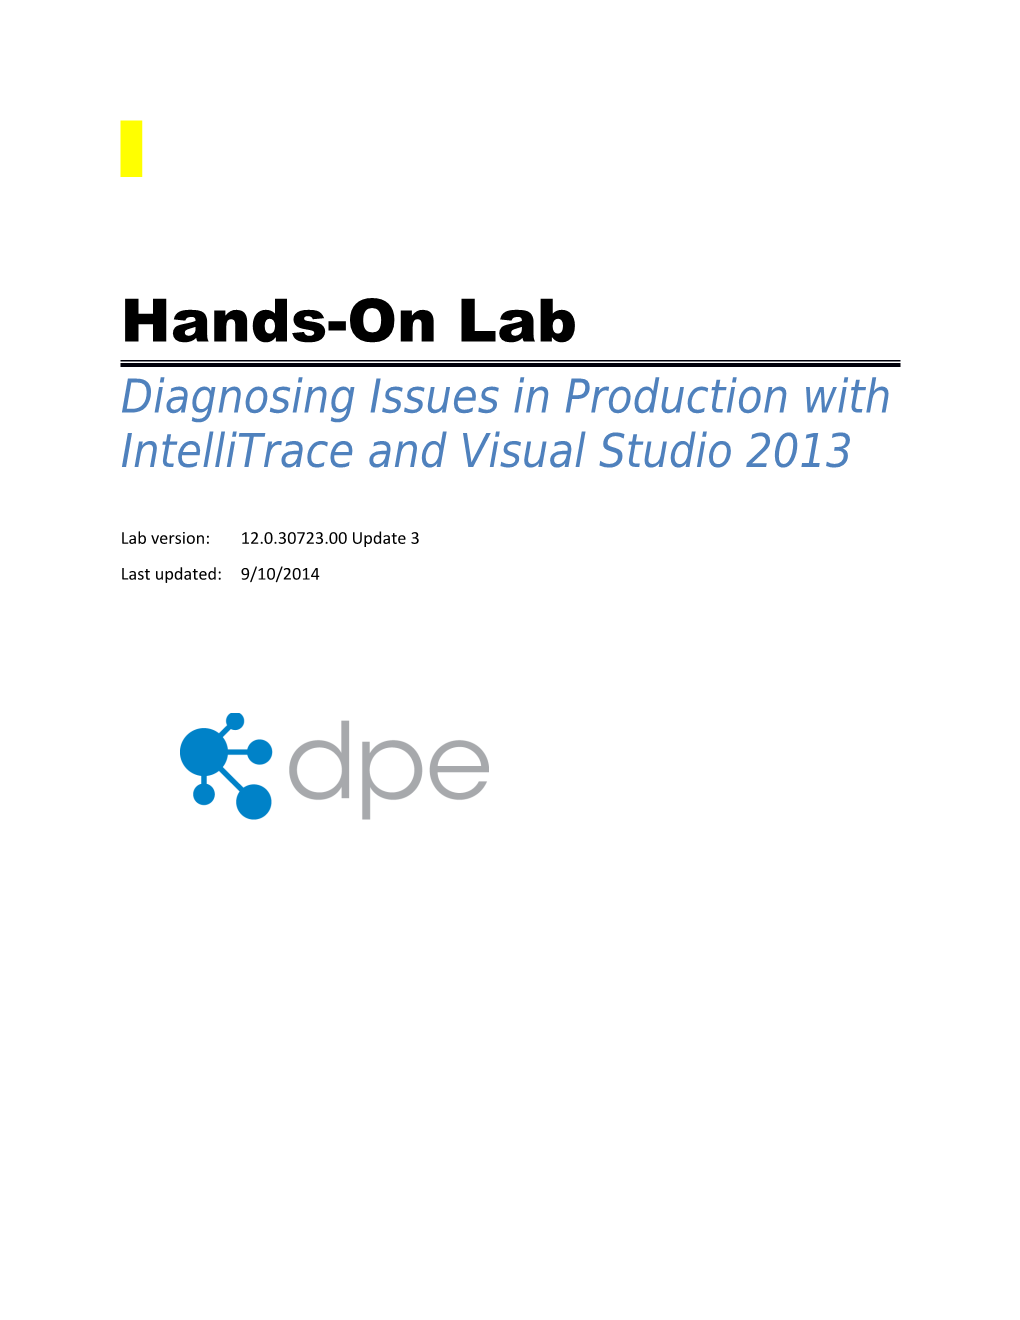 Diagnosing Issues in Production with Intellitrace and Visual Studio 2013